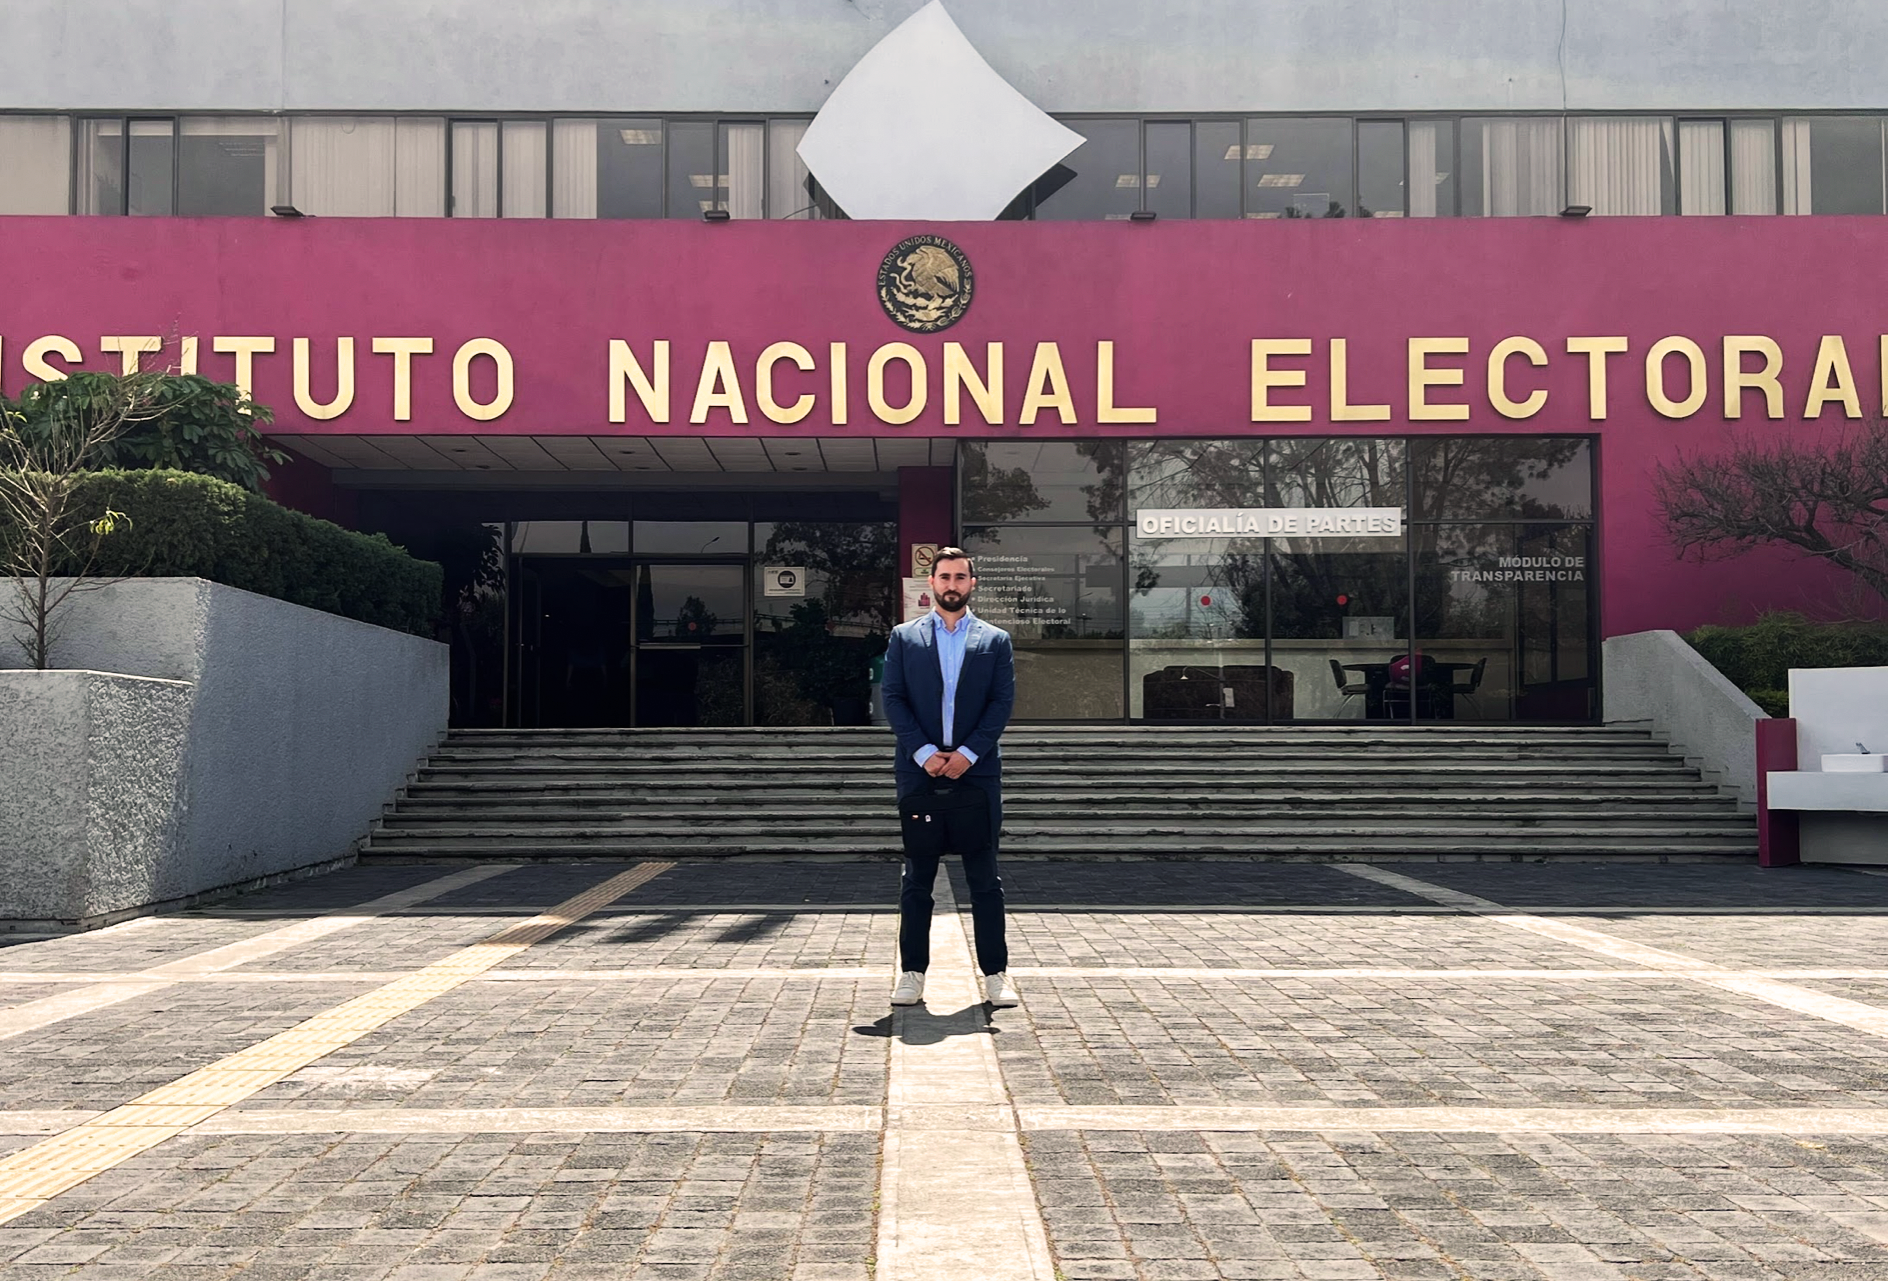 Enrique Rojas, Key Account Manager of EVoting in Mexico, in front of the National Electoral Institute (INE) in Mexico